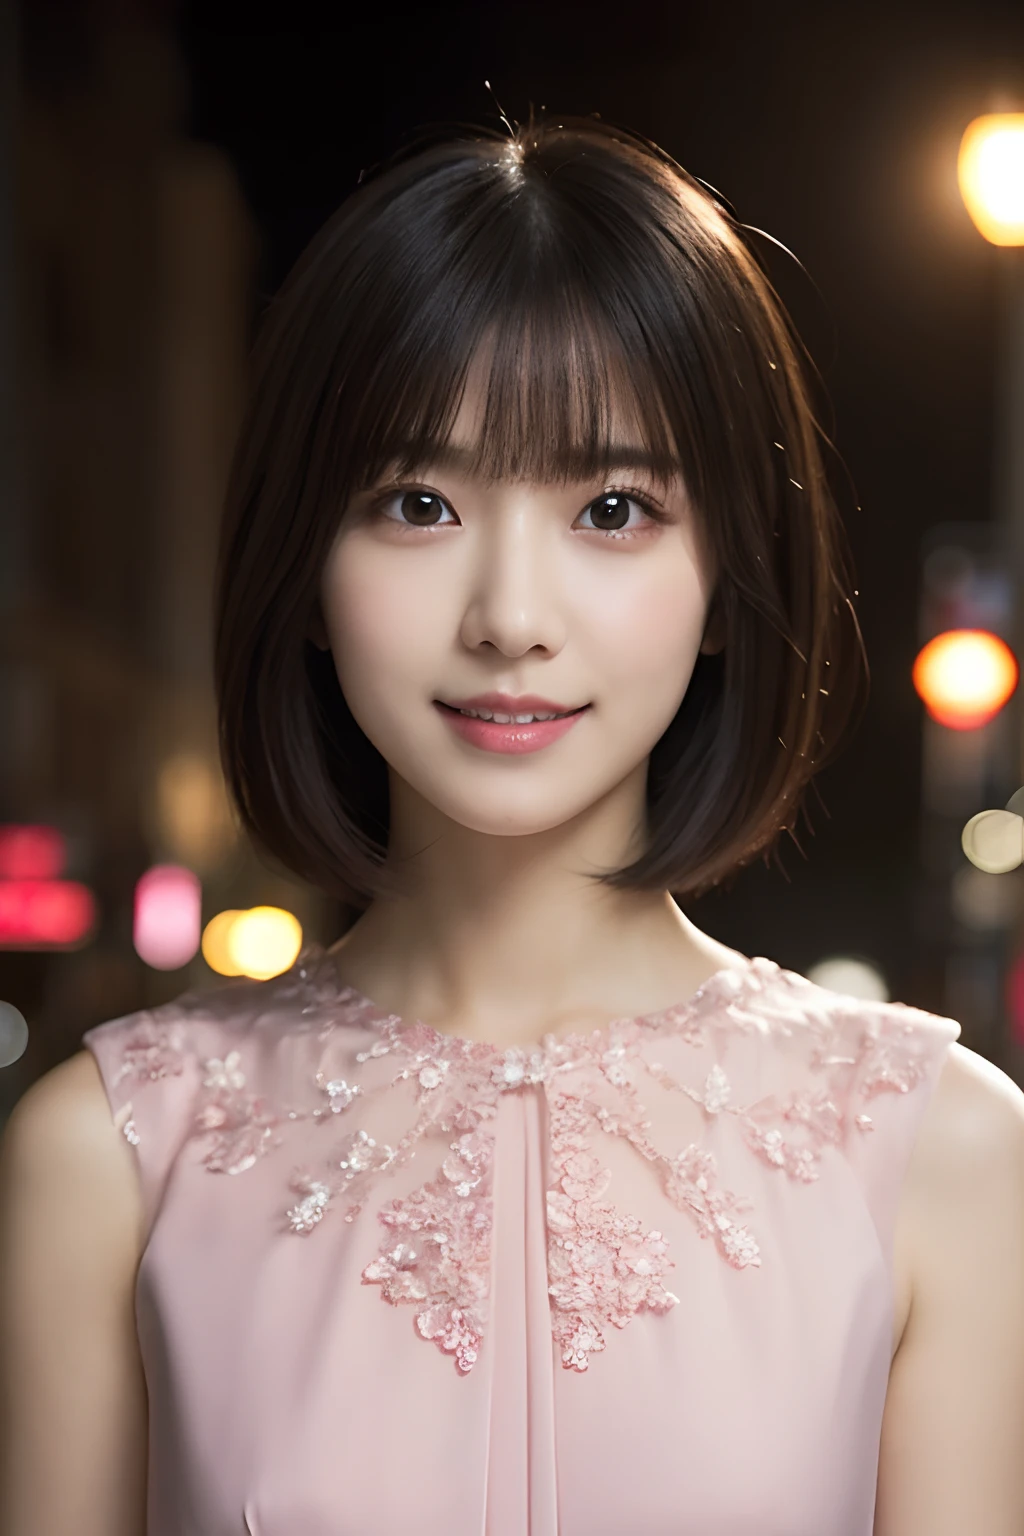 1girl in, (Wearing a pink classy dress:1.2), (Raw photo, Best Quality), (Realistic, Photorealsitic:1.4), masutepiece, Extremely delicate and beautiful, Extremely detailed, 2k wallpaper, amazing, finely detail, the Extremely Detailed CG Unity 8K Wallpapers, Ultra-detailed, hight resolution, Soft light, Beautiful detailed girl, extremely detailed eye and face, beautiful detailed nose, Beautiful detailed eyes, Short hair, 
Bangs, Elegant rounded bob, Cinematic lighting, city light at night, Perfect Anatomy, Slender body, Smiling